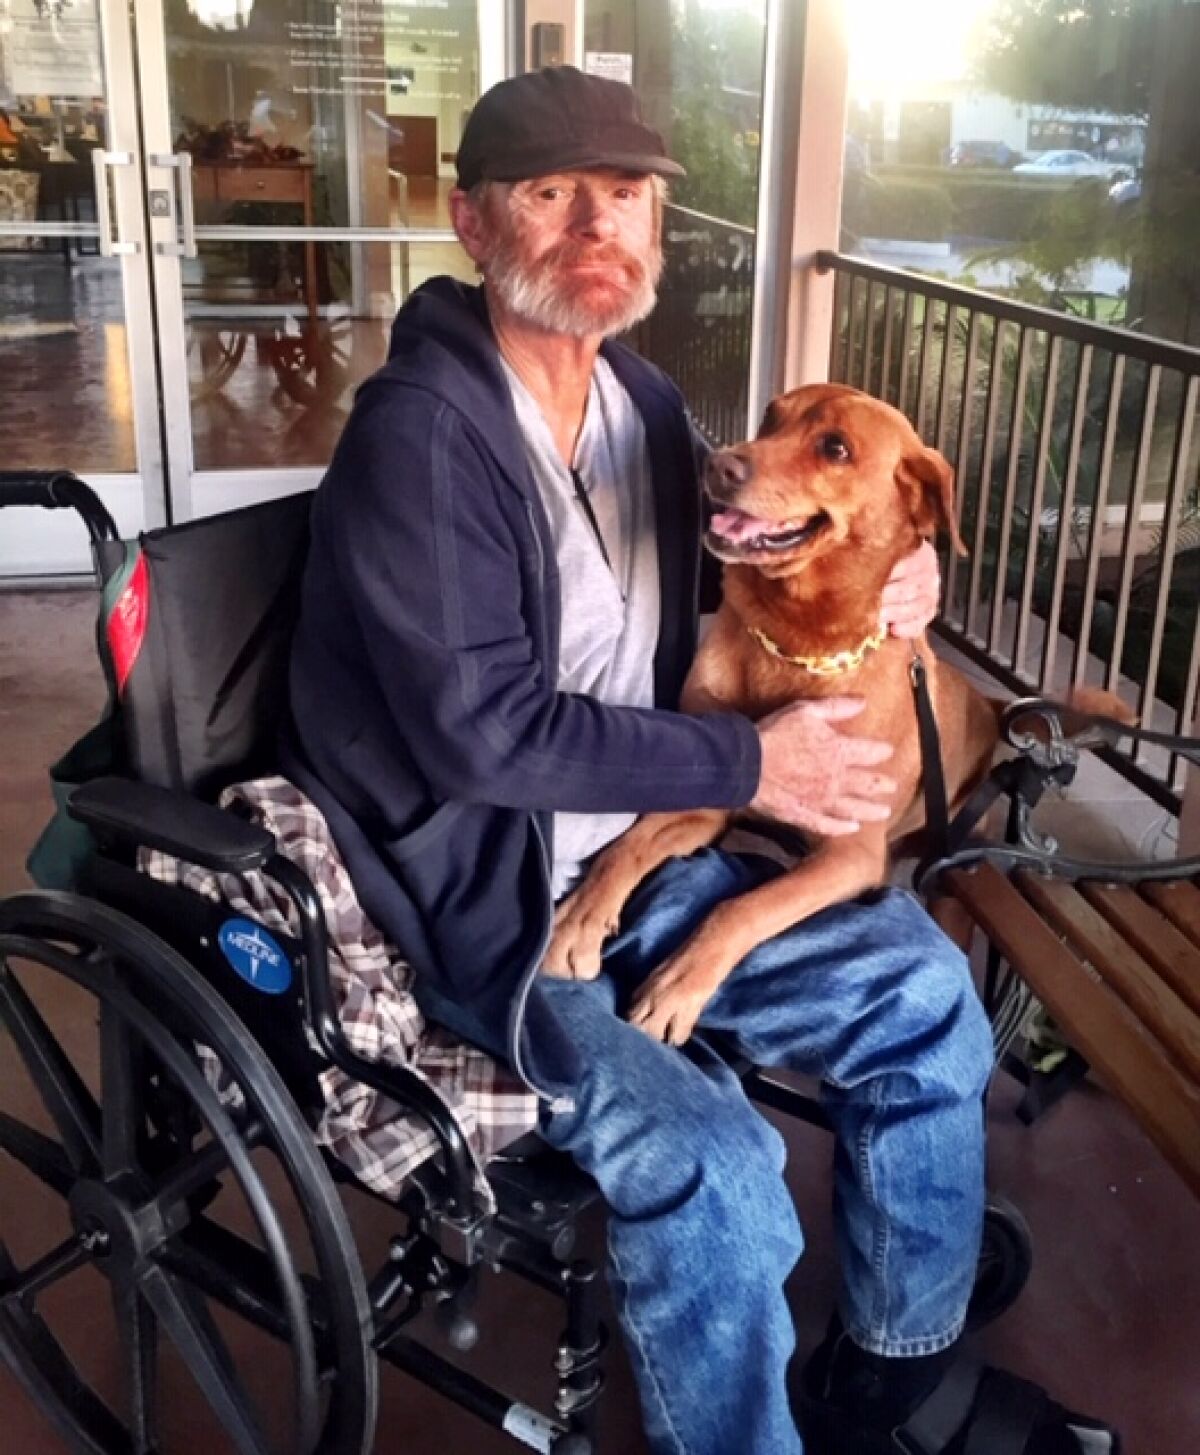 Hobo reunited with Dreamer after four months apart while Hobo dealt with surgery.